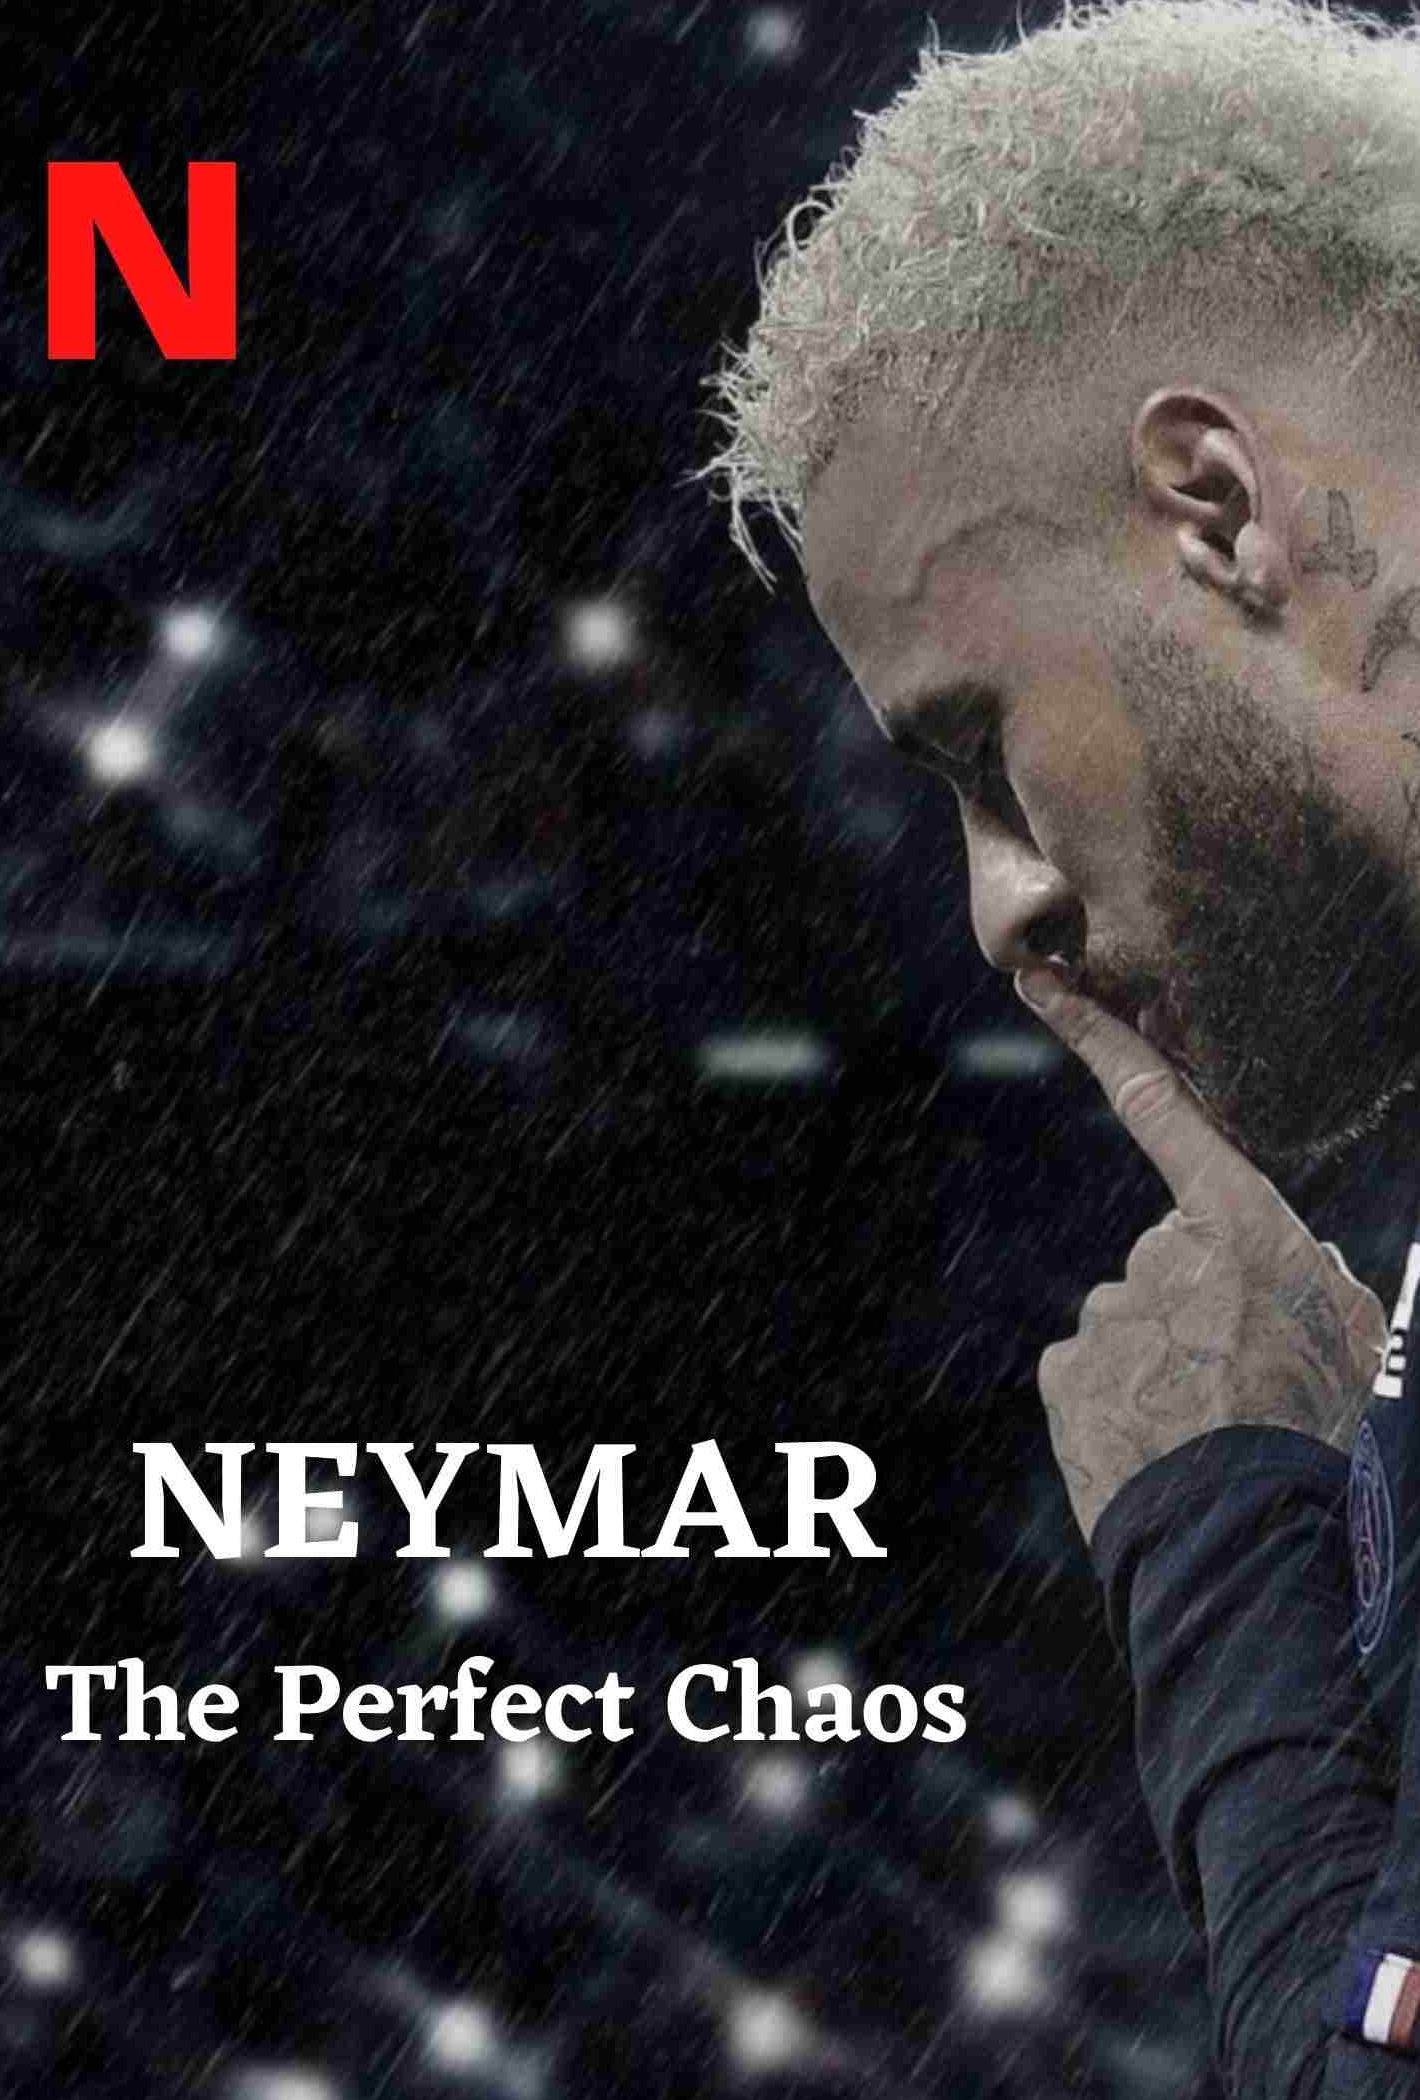 Is Netflix premiering the documentary film called Neymar The Perfect Chaos